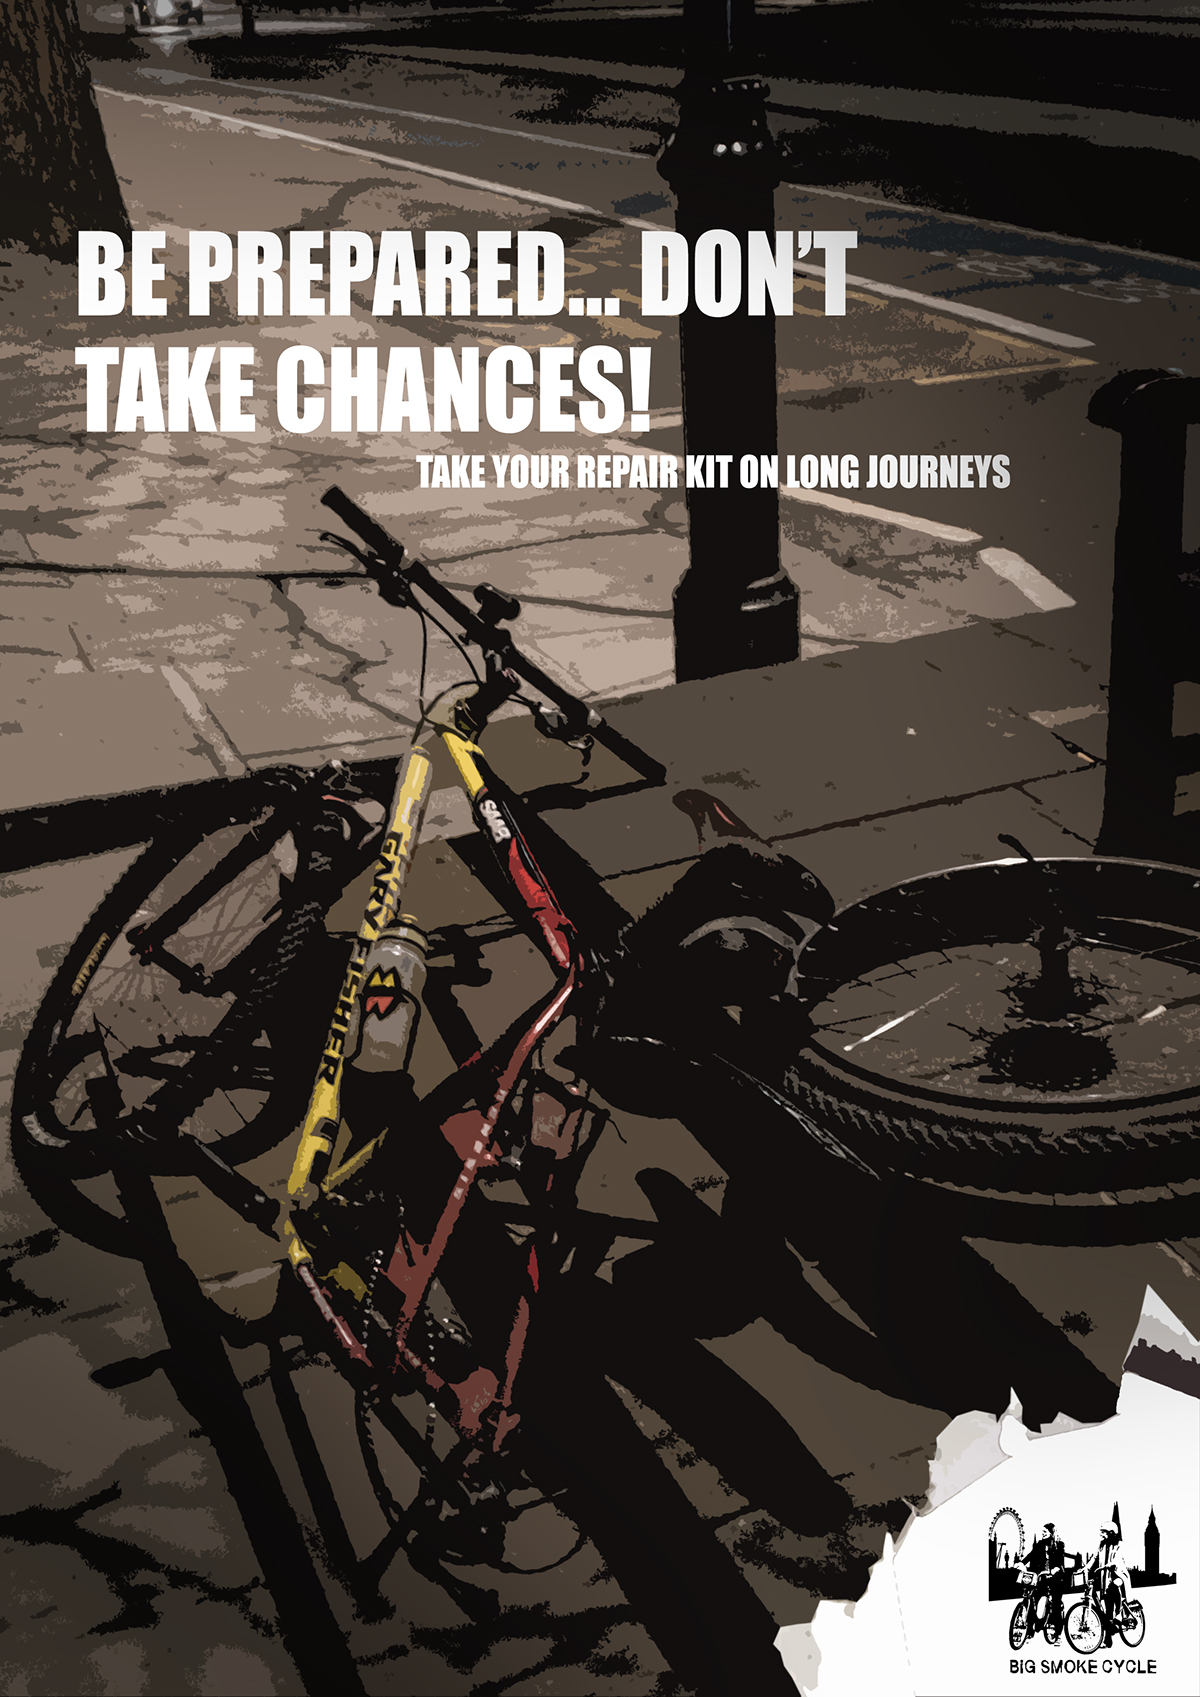 posters camapign Cycling safety graphic think London city relax